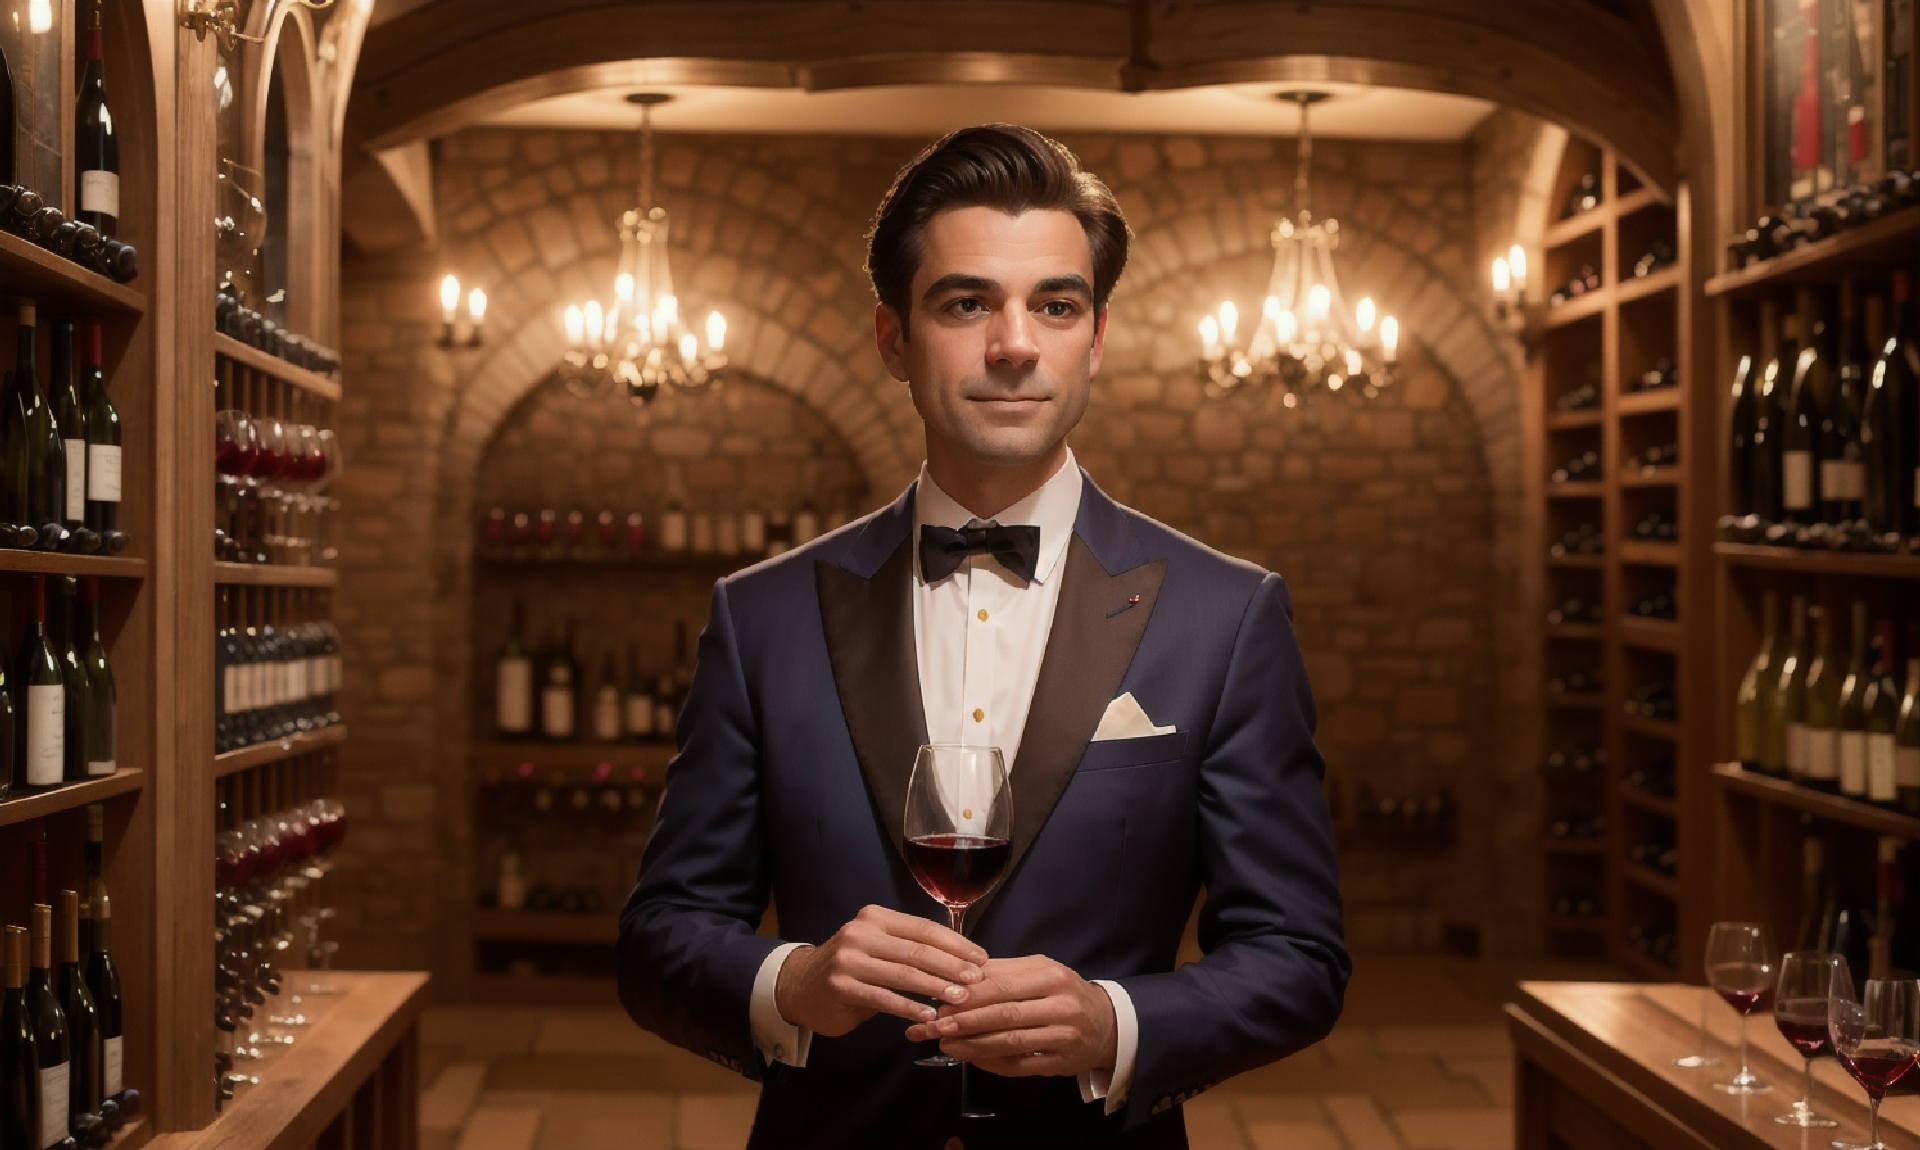 ultra-realistic, high-resolution 4K photograph of a professional sommelier in elegant attire, standing in a sophisticated wine cellar. The sommelier is examining a glass of red wine with keen interest, the tastevin necklace prominently displayed against a backdrop of wine racks filled with vintage wines